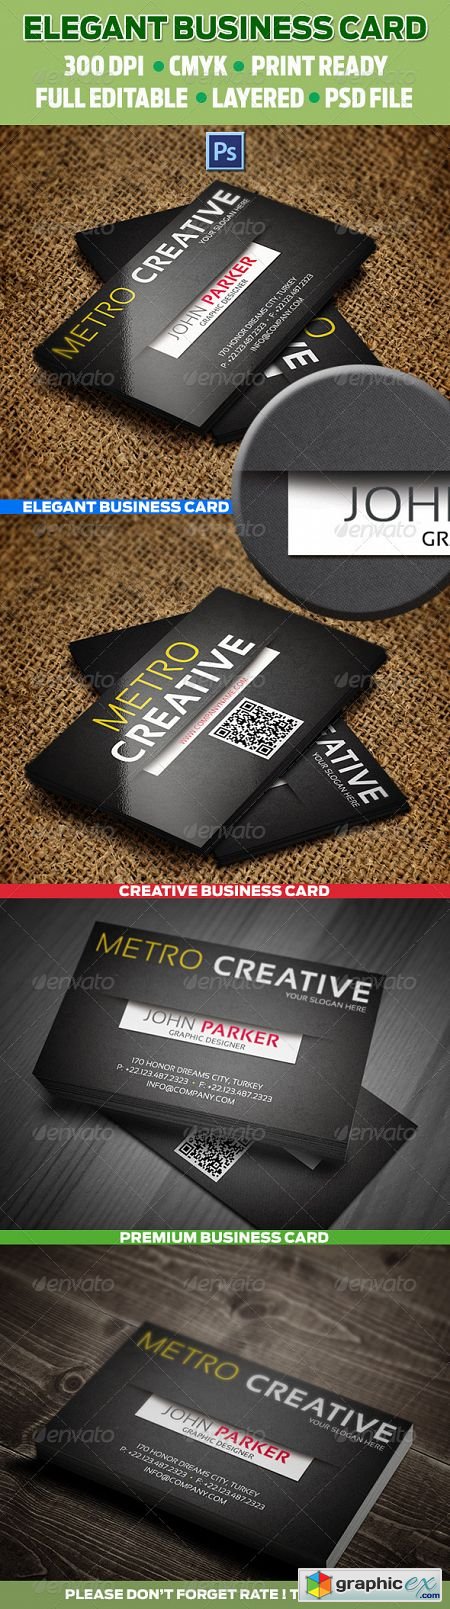 Creative Business Cards 23